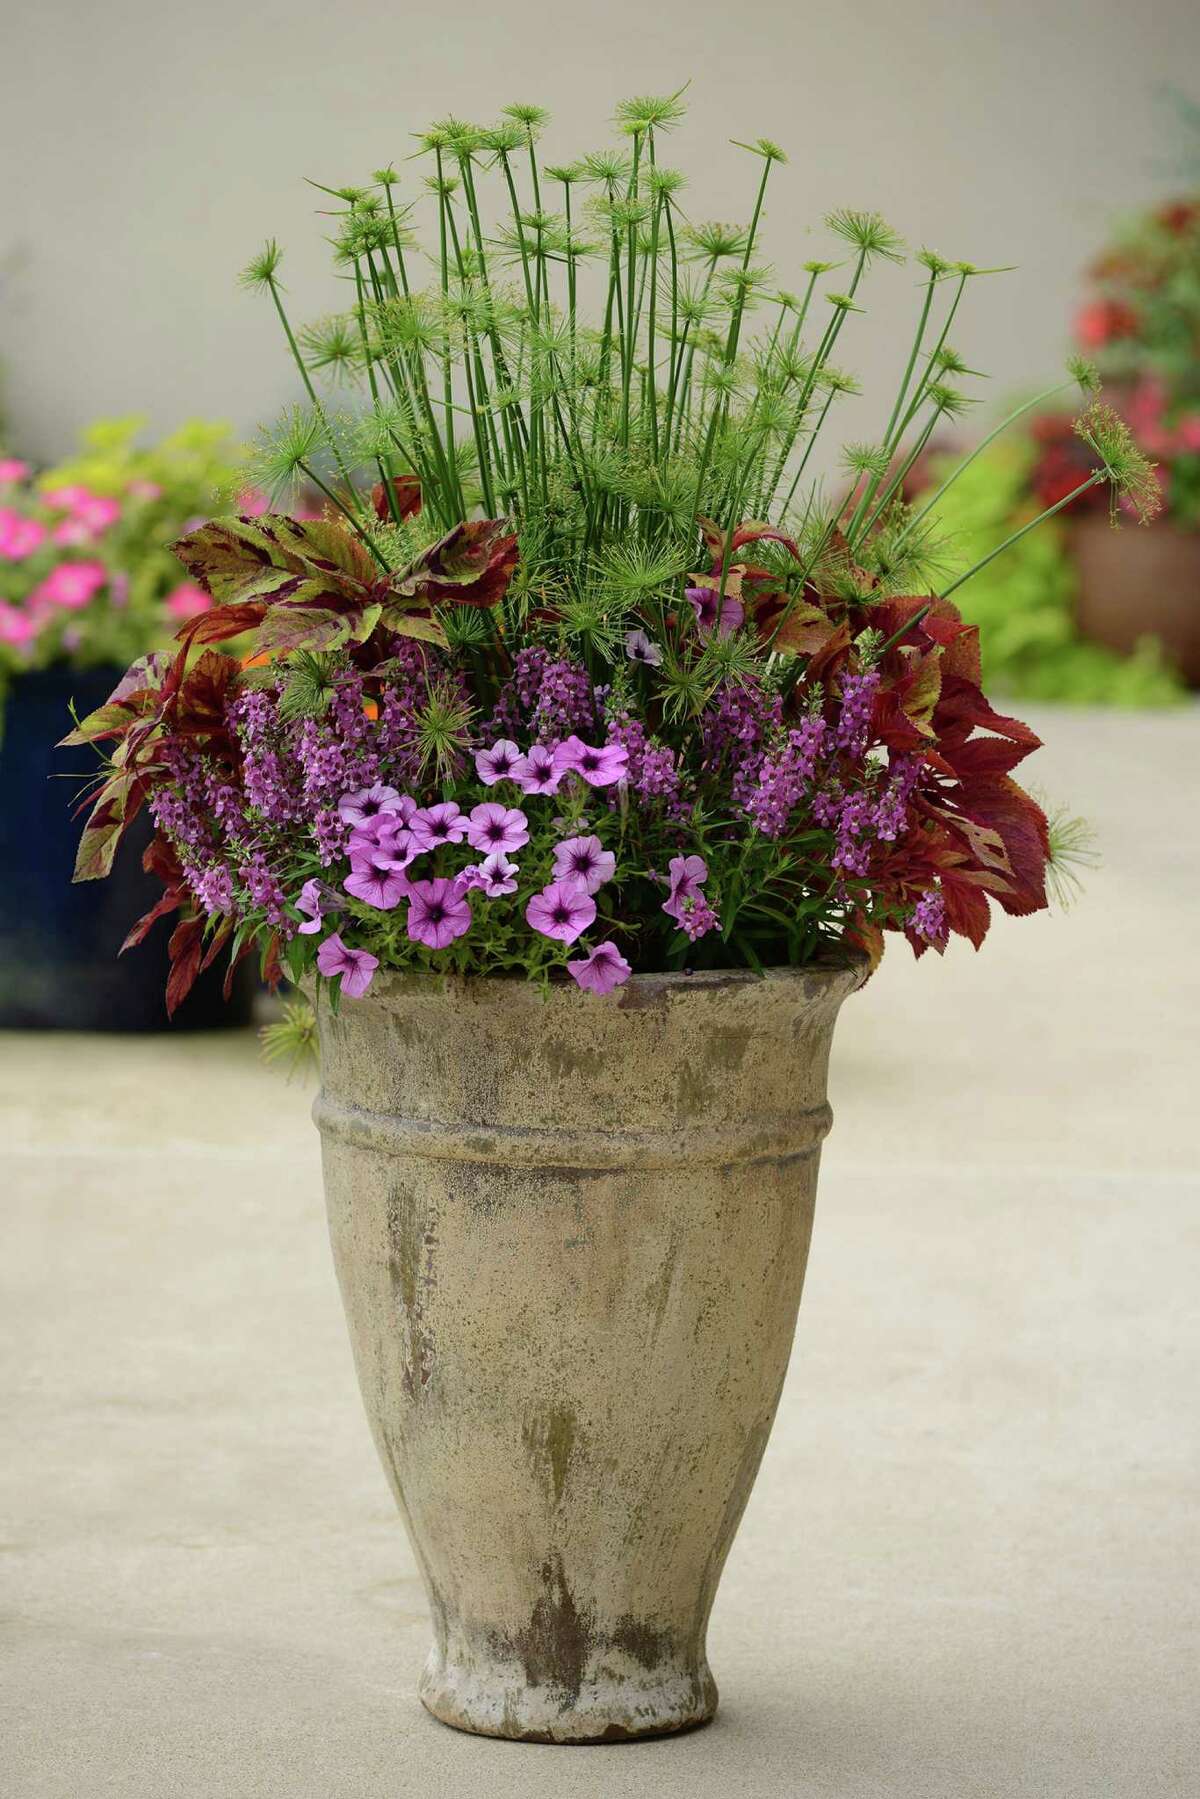 ﻿Plants can add color to the front of a house.